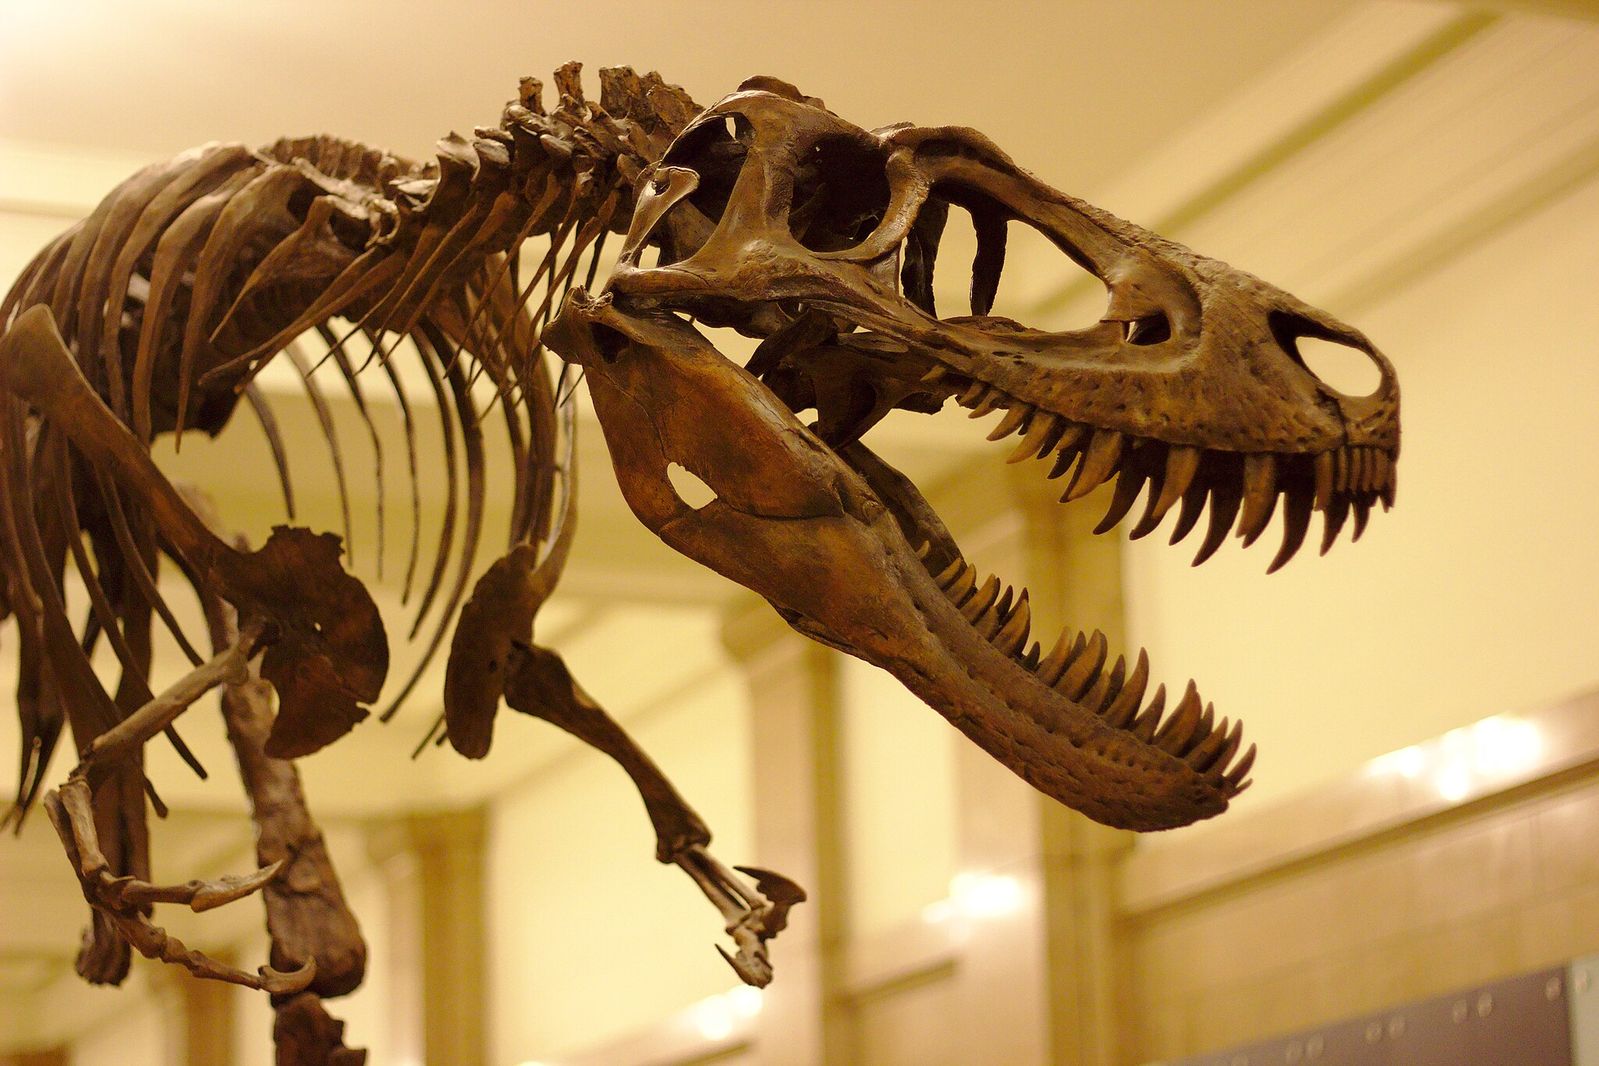 How Intelligent Was T. Rex? Scientists Suggest the Dinosaurs Were Like 'Smart, Giant Crocodiles'